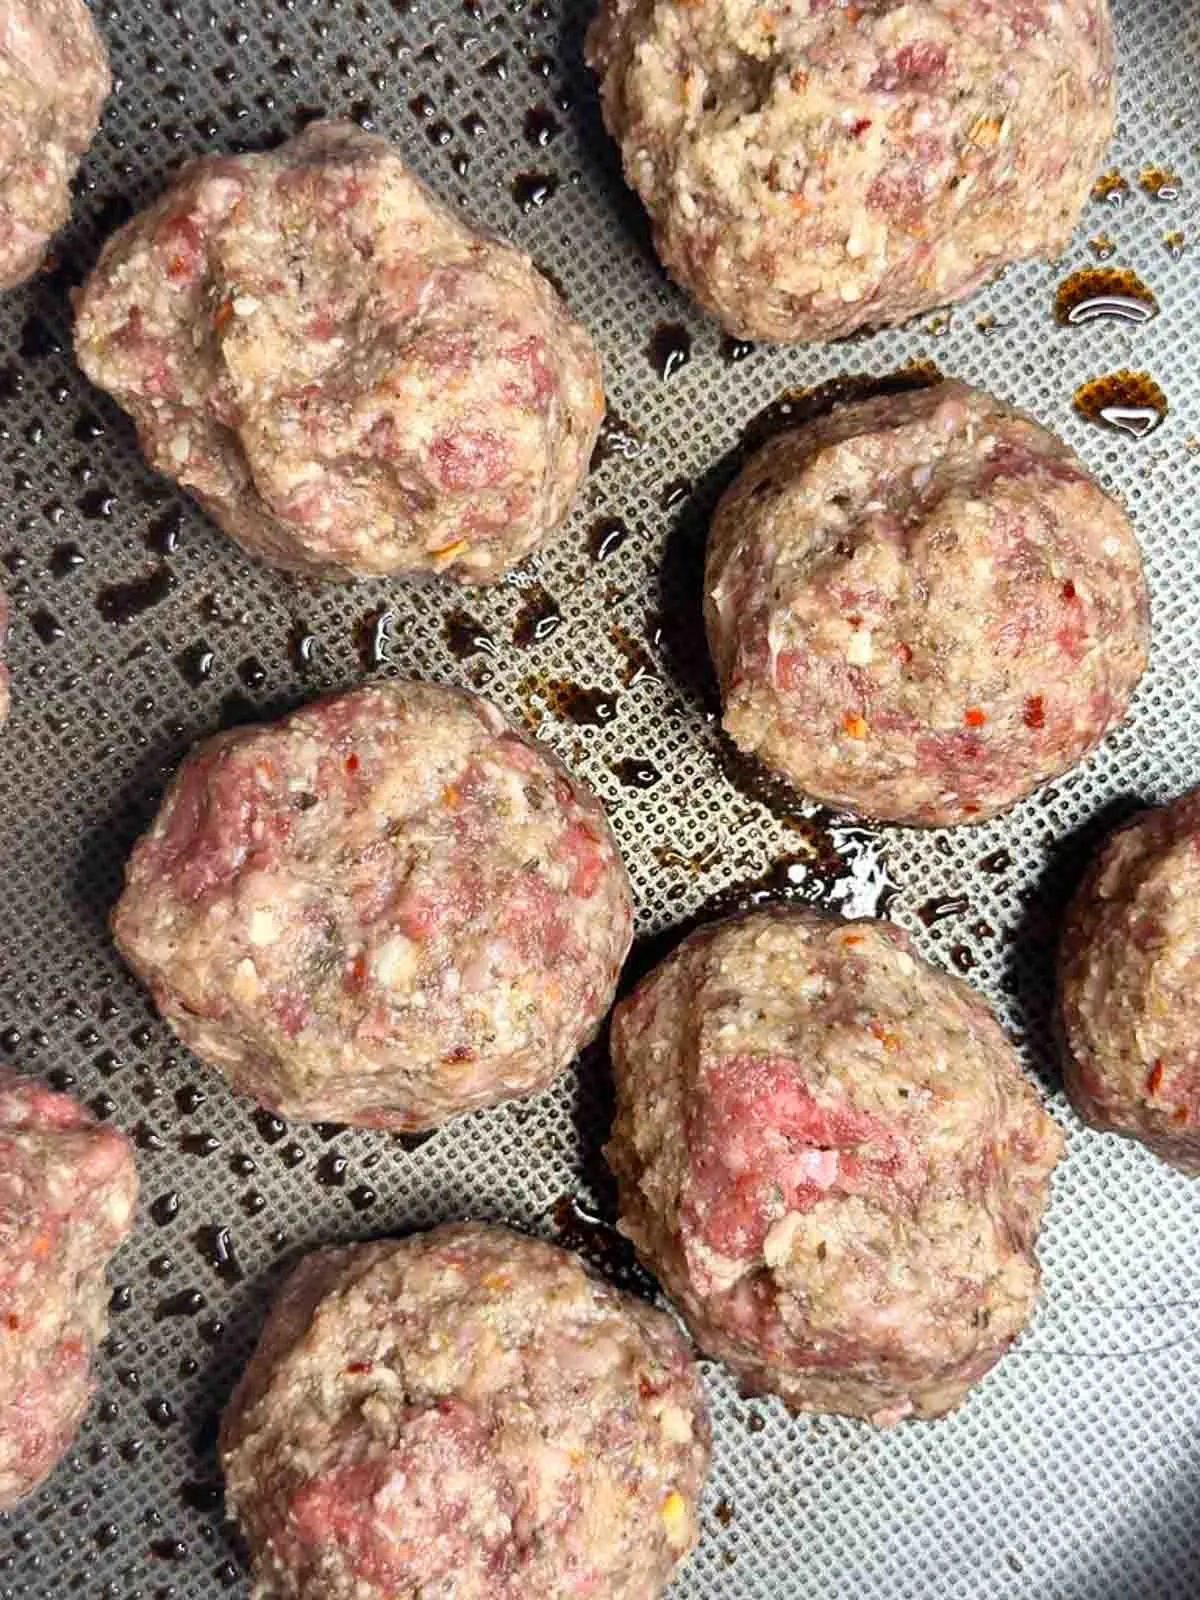 Sear the meatballs in a large pan with olive oil.